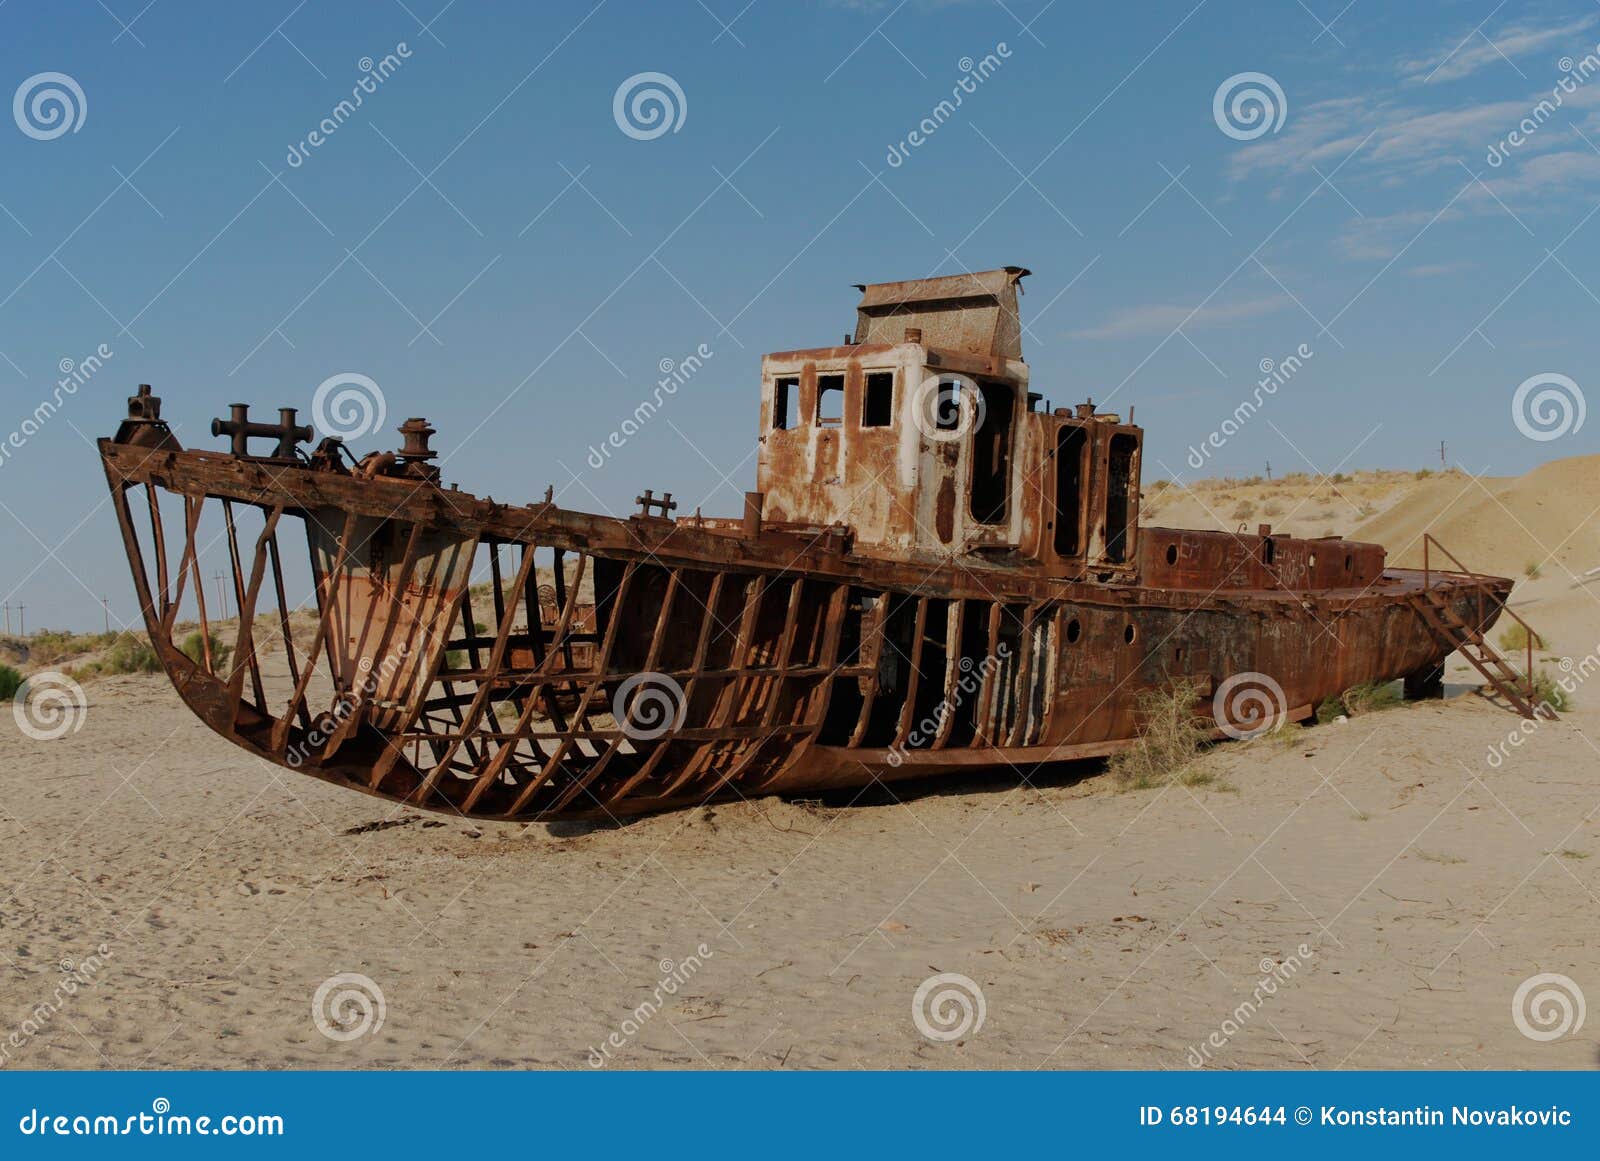 The aral sea desertification